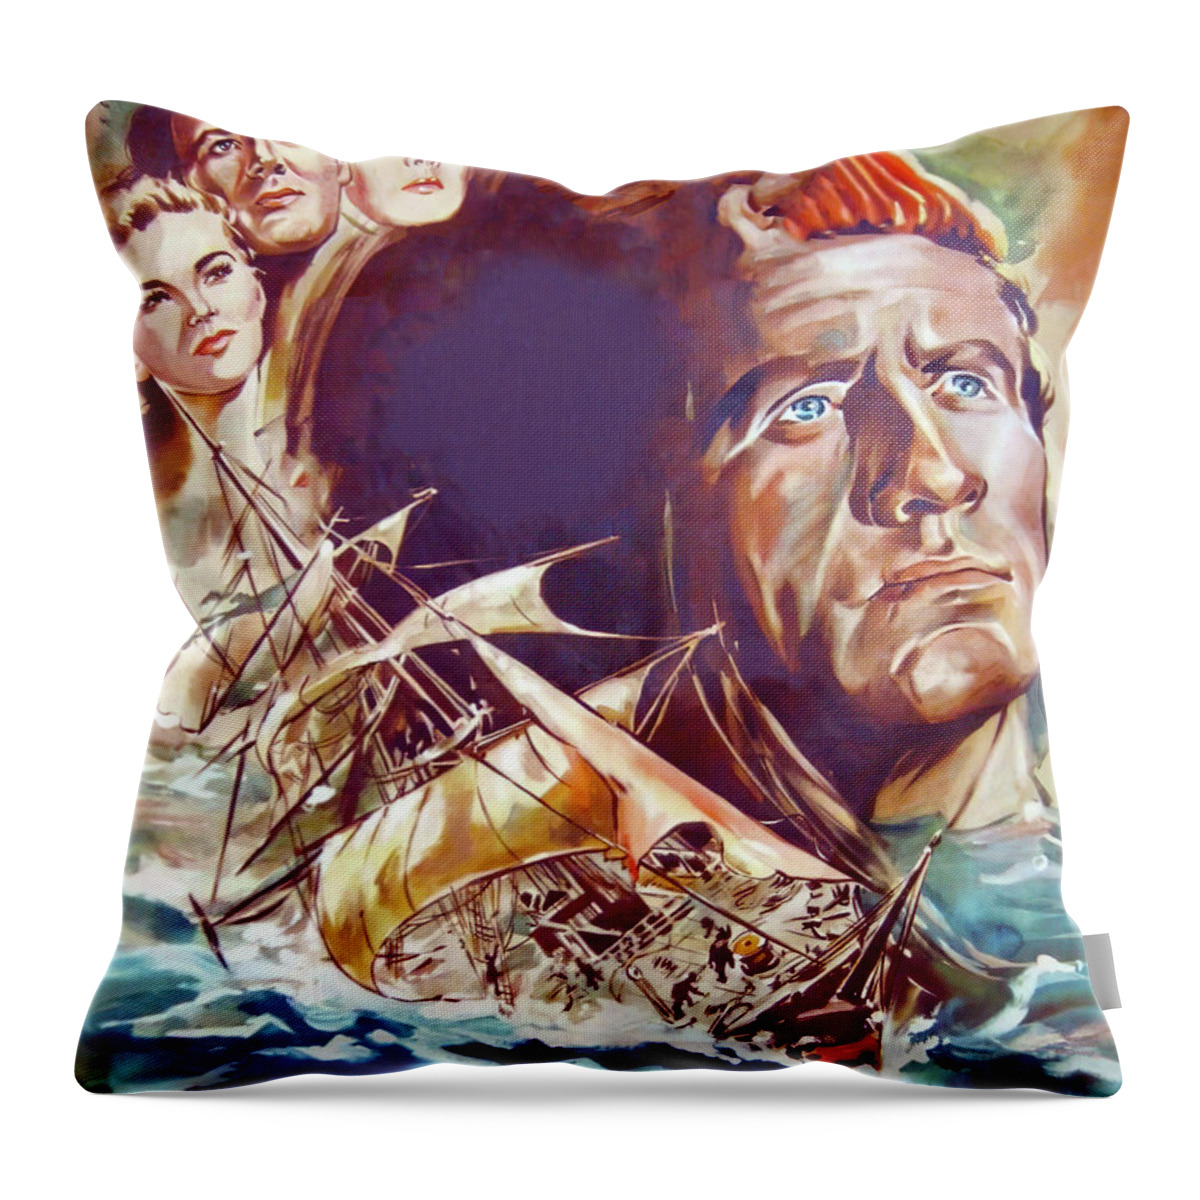 Plymouth Throw Pillow featuring the painting ''Plymouth Adventure'', 1950, movie poster painting by Georg Schubert by Stars on Art